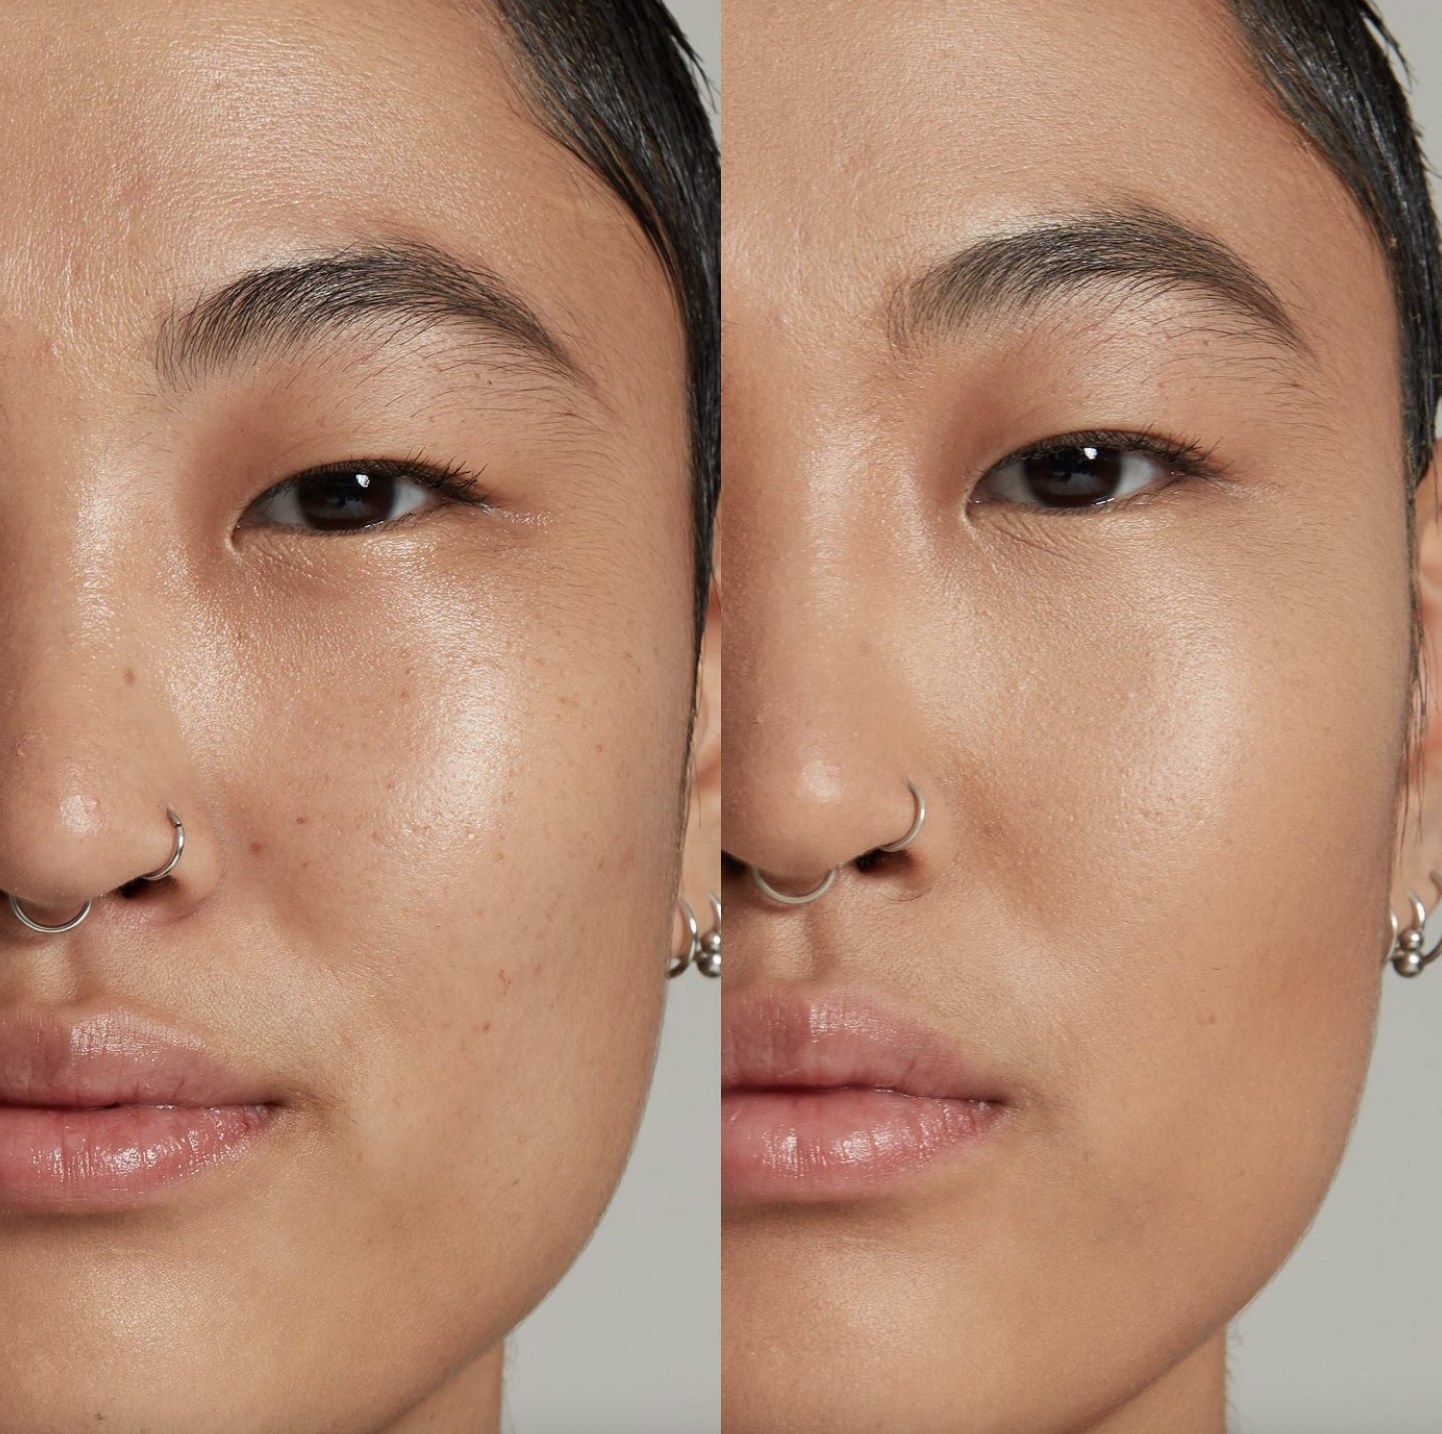 A woman showing her face before and after using concealer